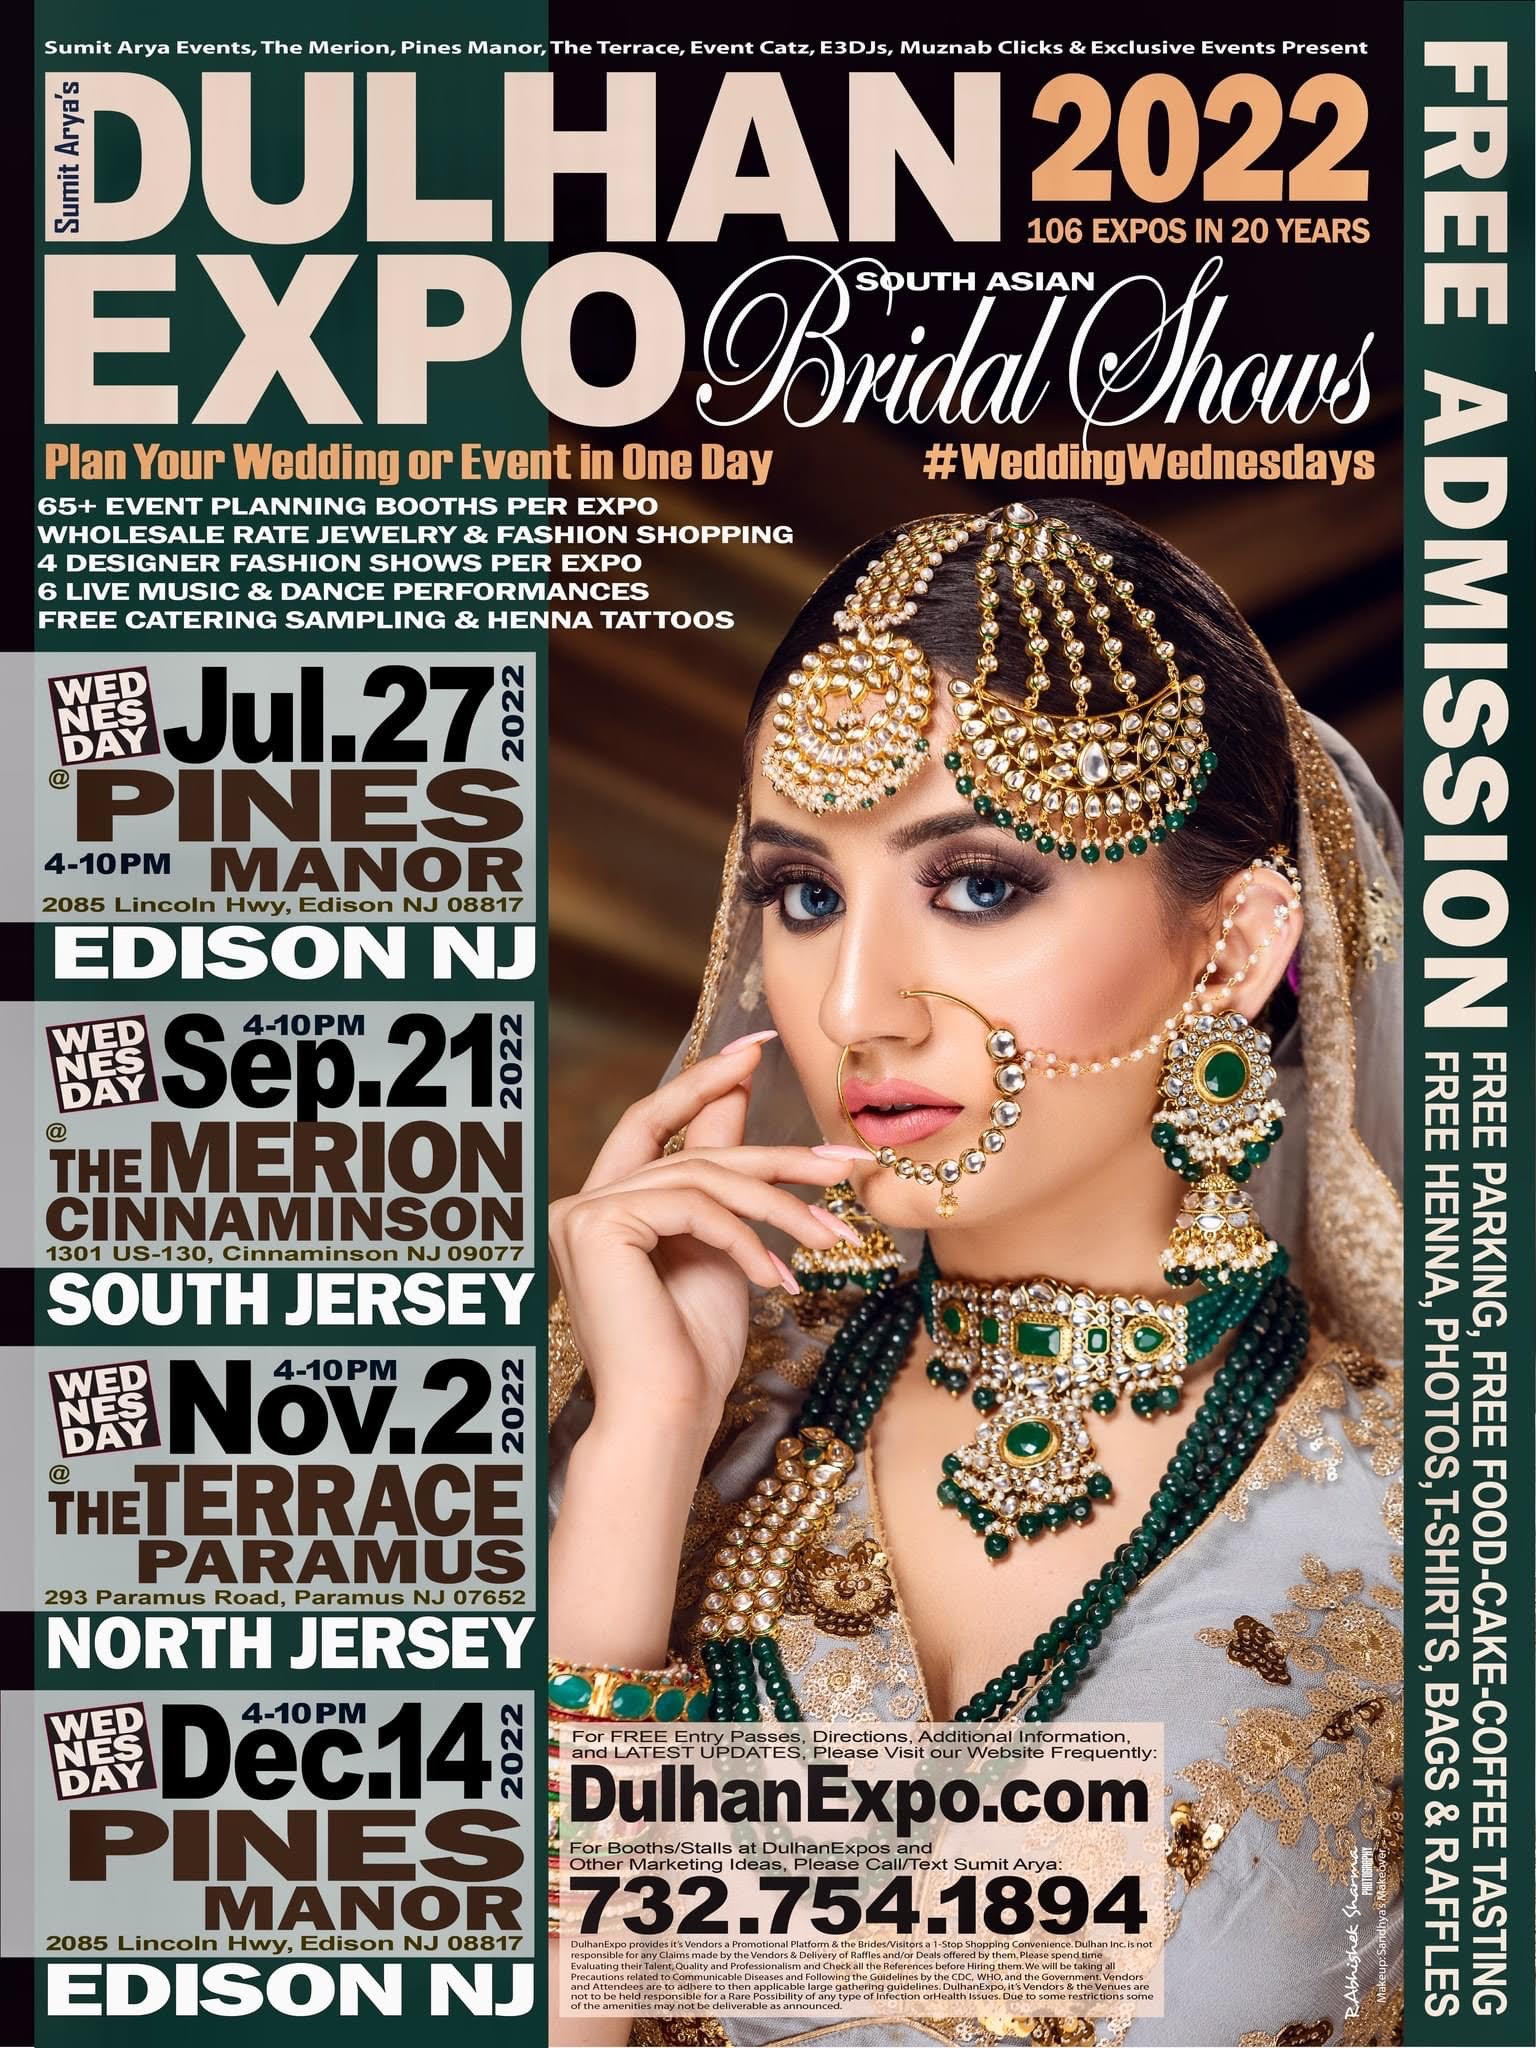 July.27 • DulhanExpo Bridal Show • FREE ADMISSION • DulhanExpo.com